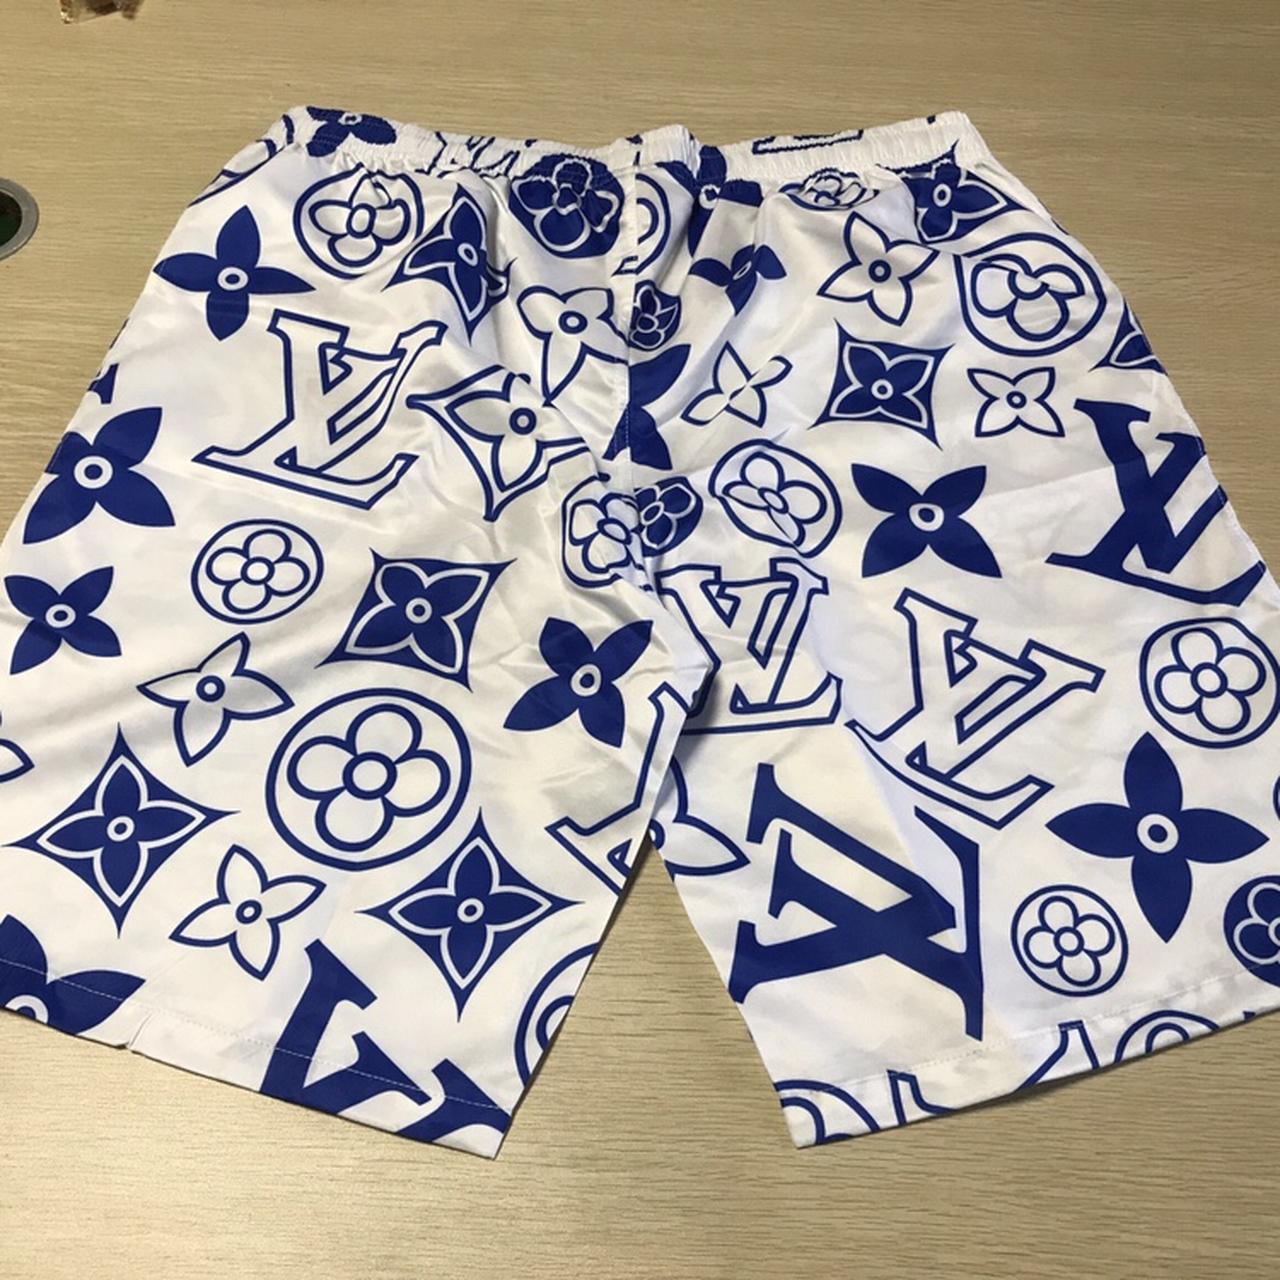 Imran Potato Lv Shorts Fancy Sold out in 30 Seconds - Depop